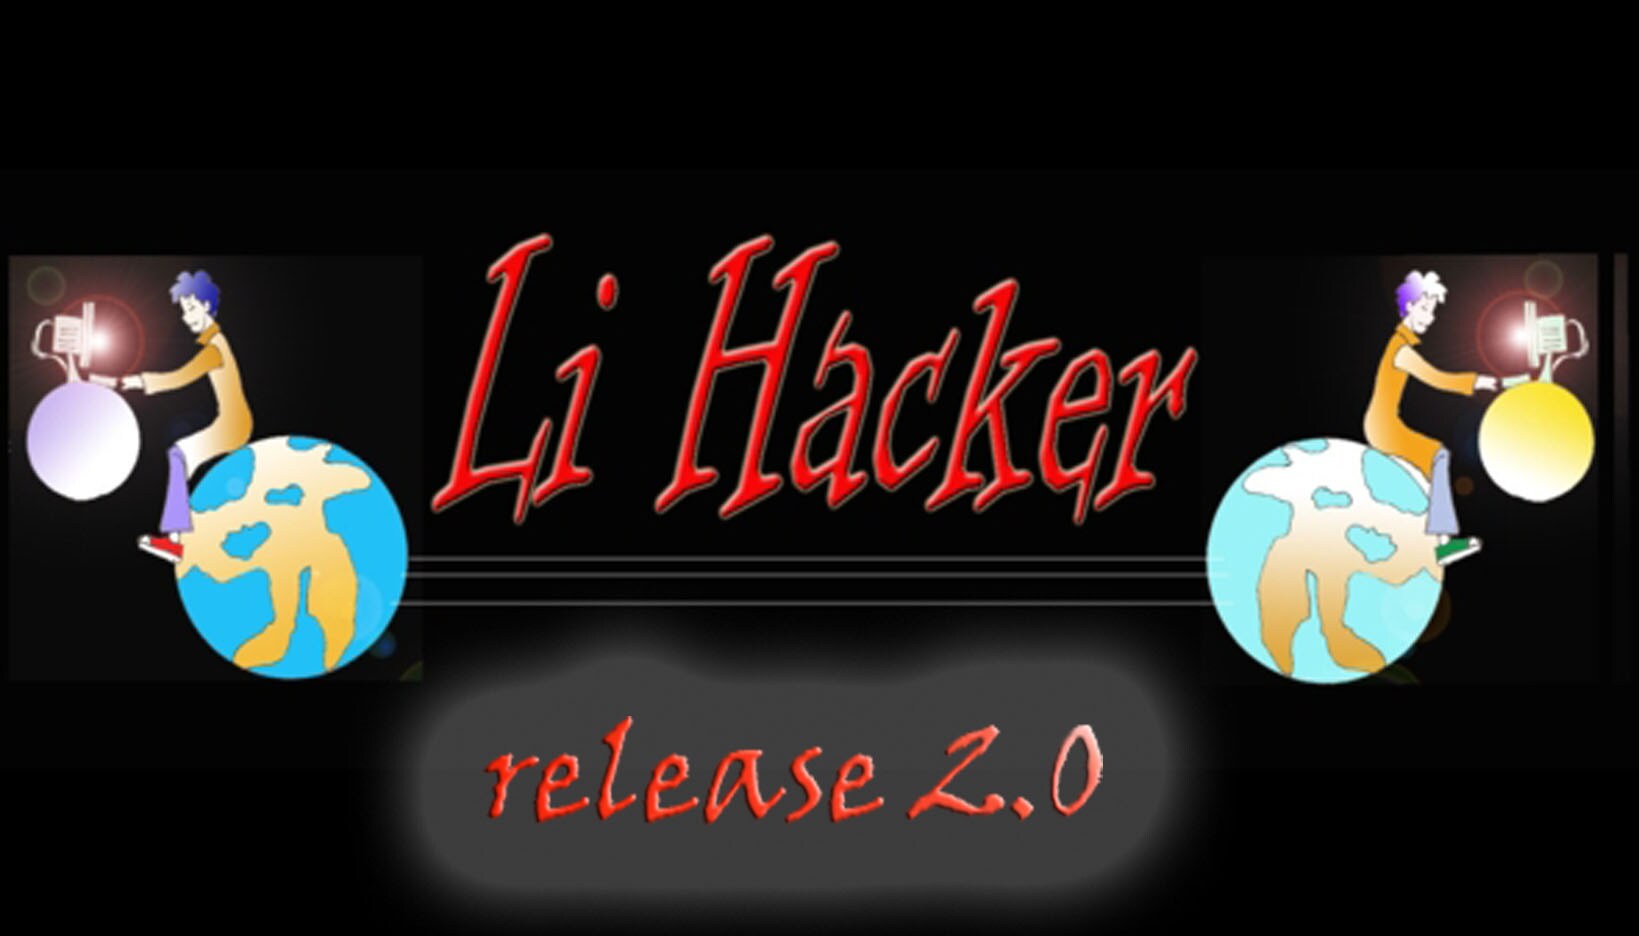 We read: �Li Hacker� in red characters.  On the right and on the left there is the specular image of Li Hacker sitting on the Earth. He is typing on a keyboard. Black cosmos in the background.